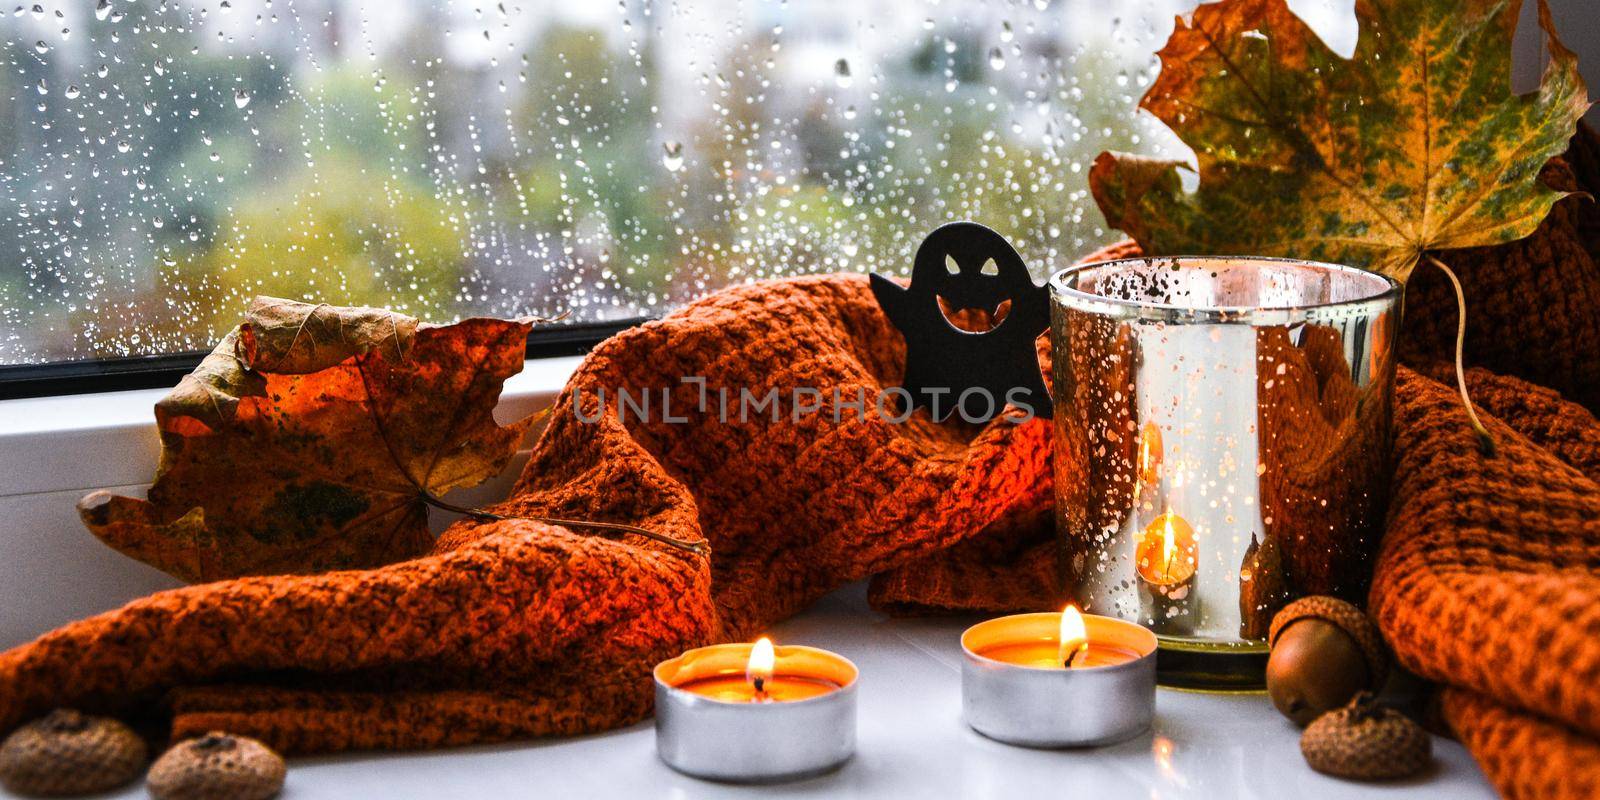 Candles with sweater and ghost pumpkin, dried leaves on windowsill. Halloween home decoration. Rainy window. Cozy home interior